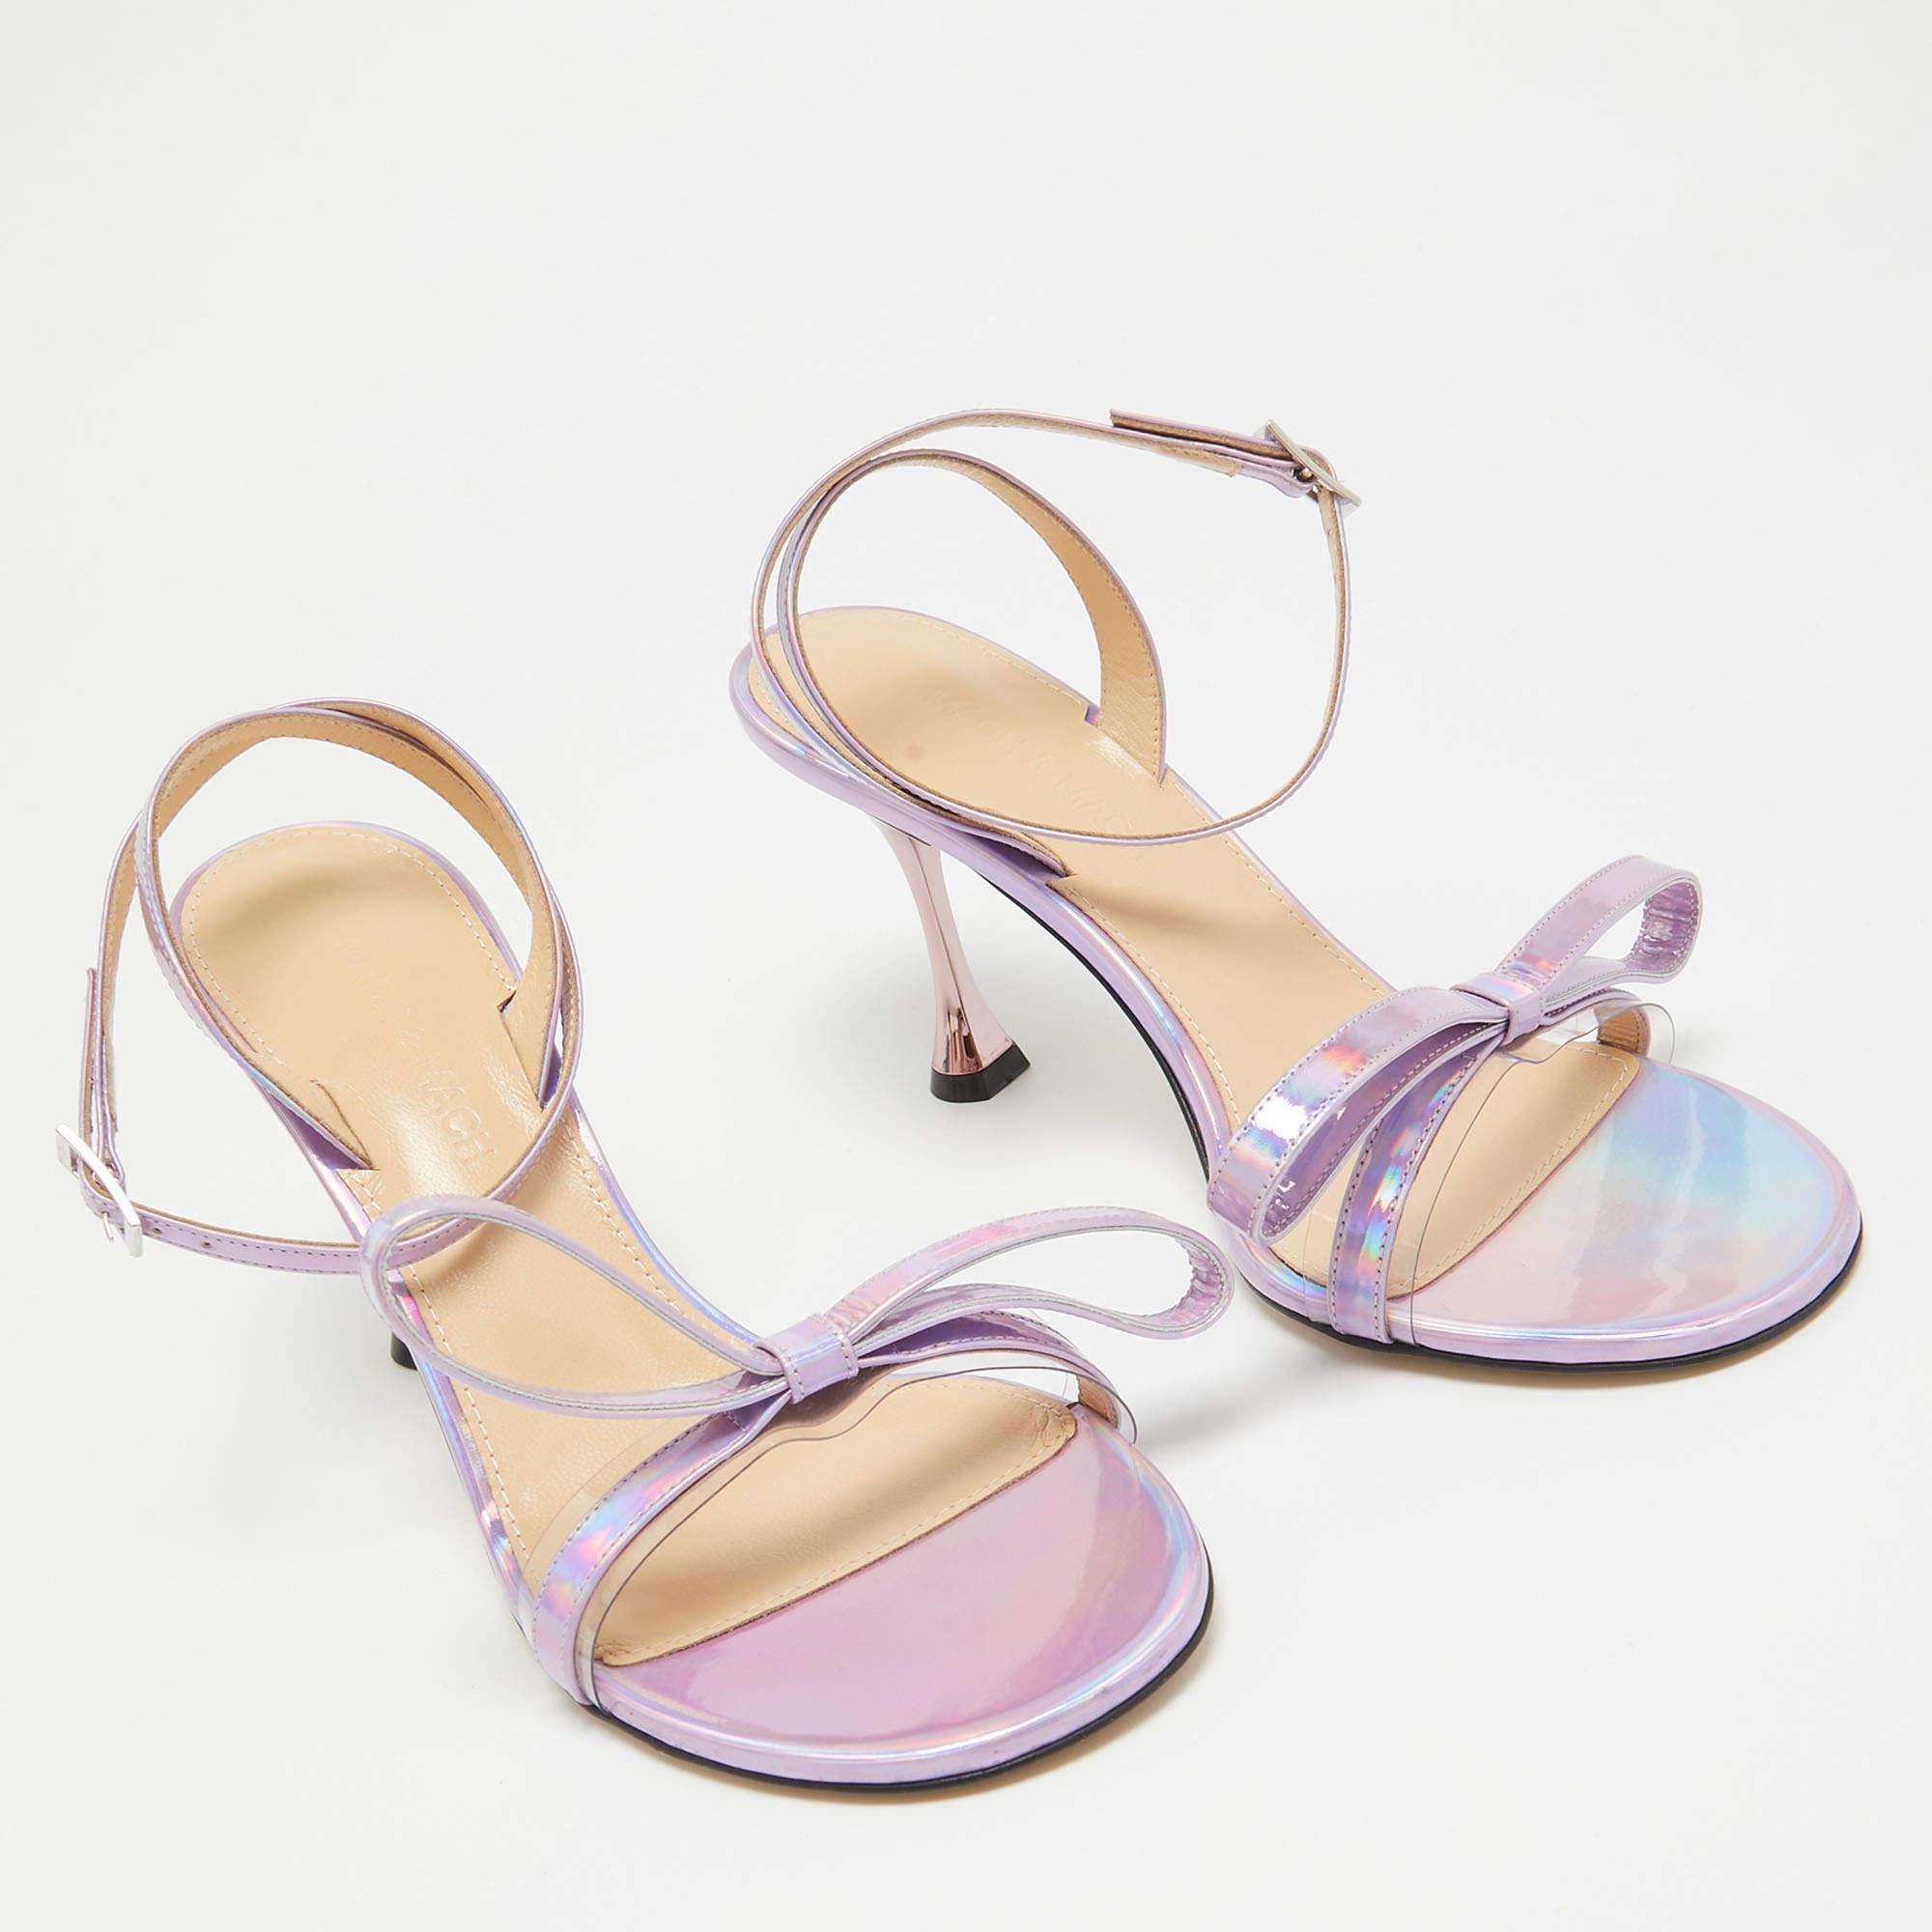 Mach & Mach Purple Iridescent Leather French Bow Sandals Size 38.5 For Sale 1